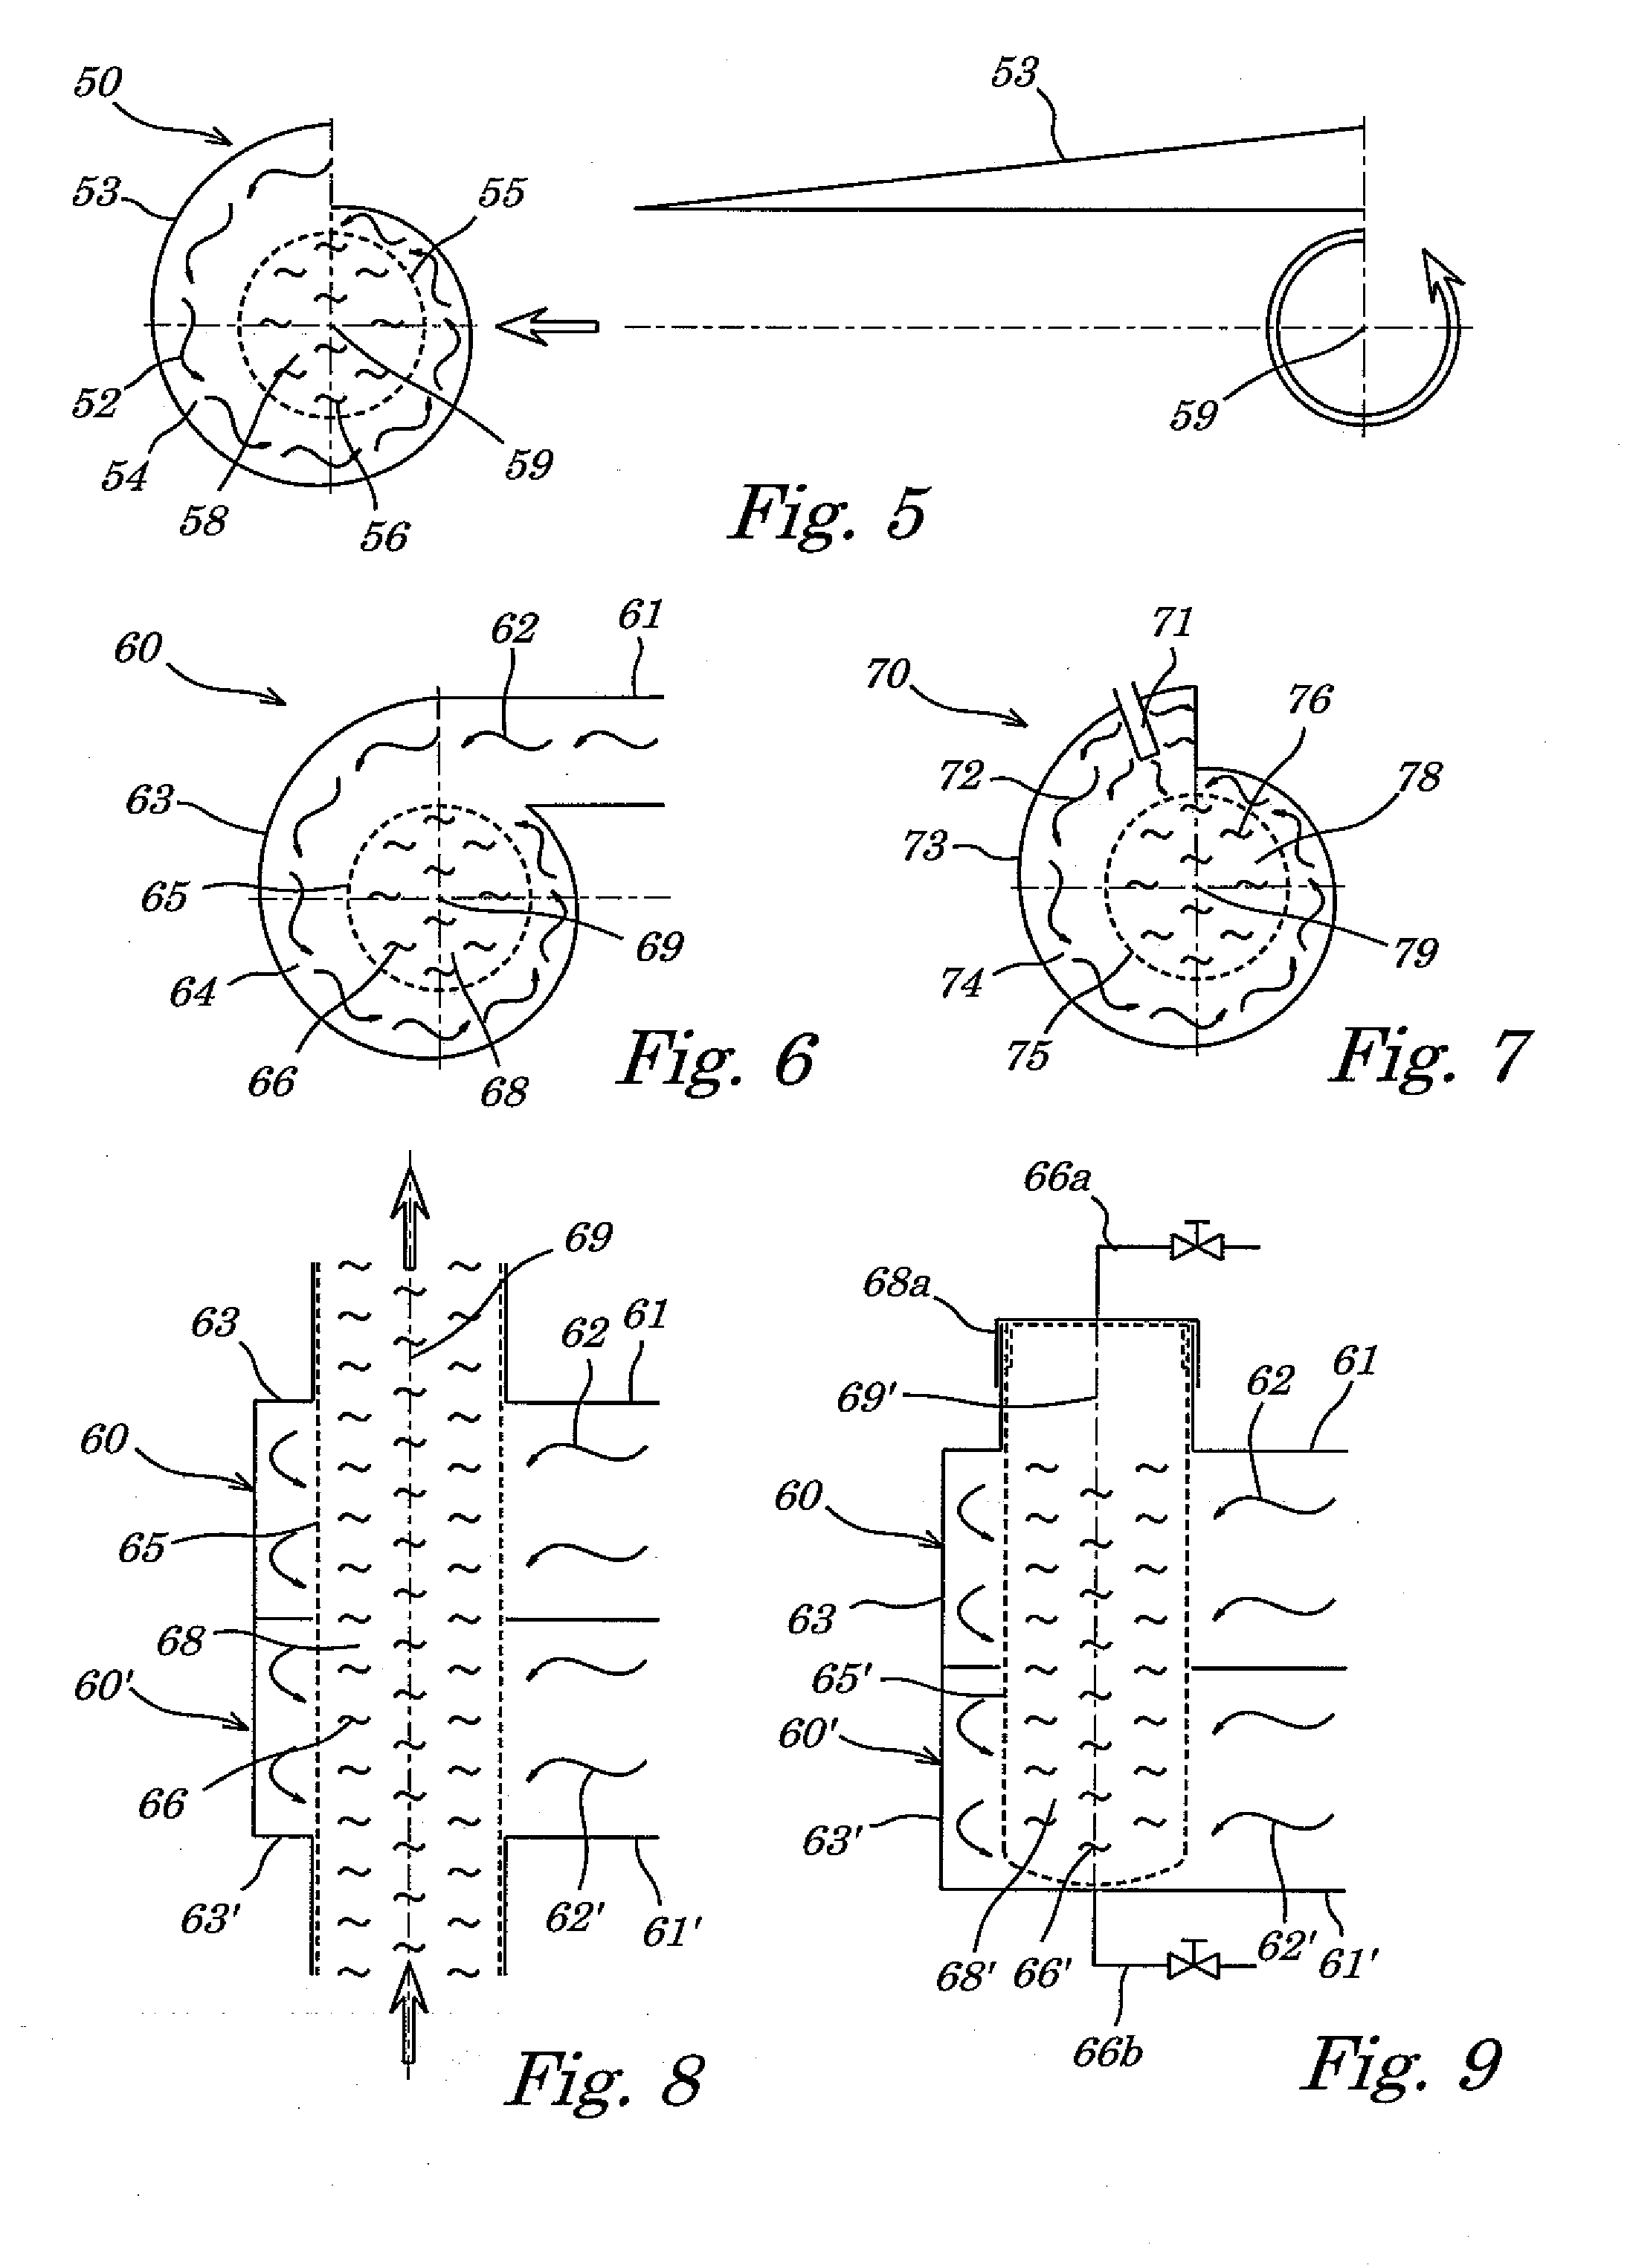 Applicator and apparatus for heating samples by microwave radiation